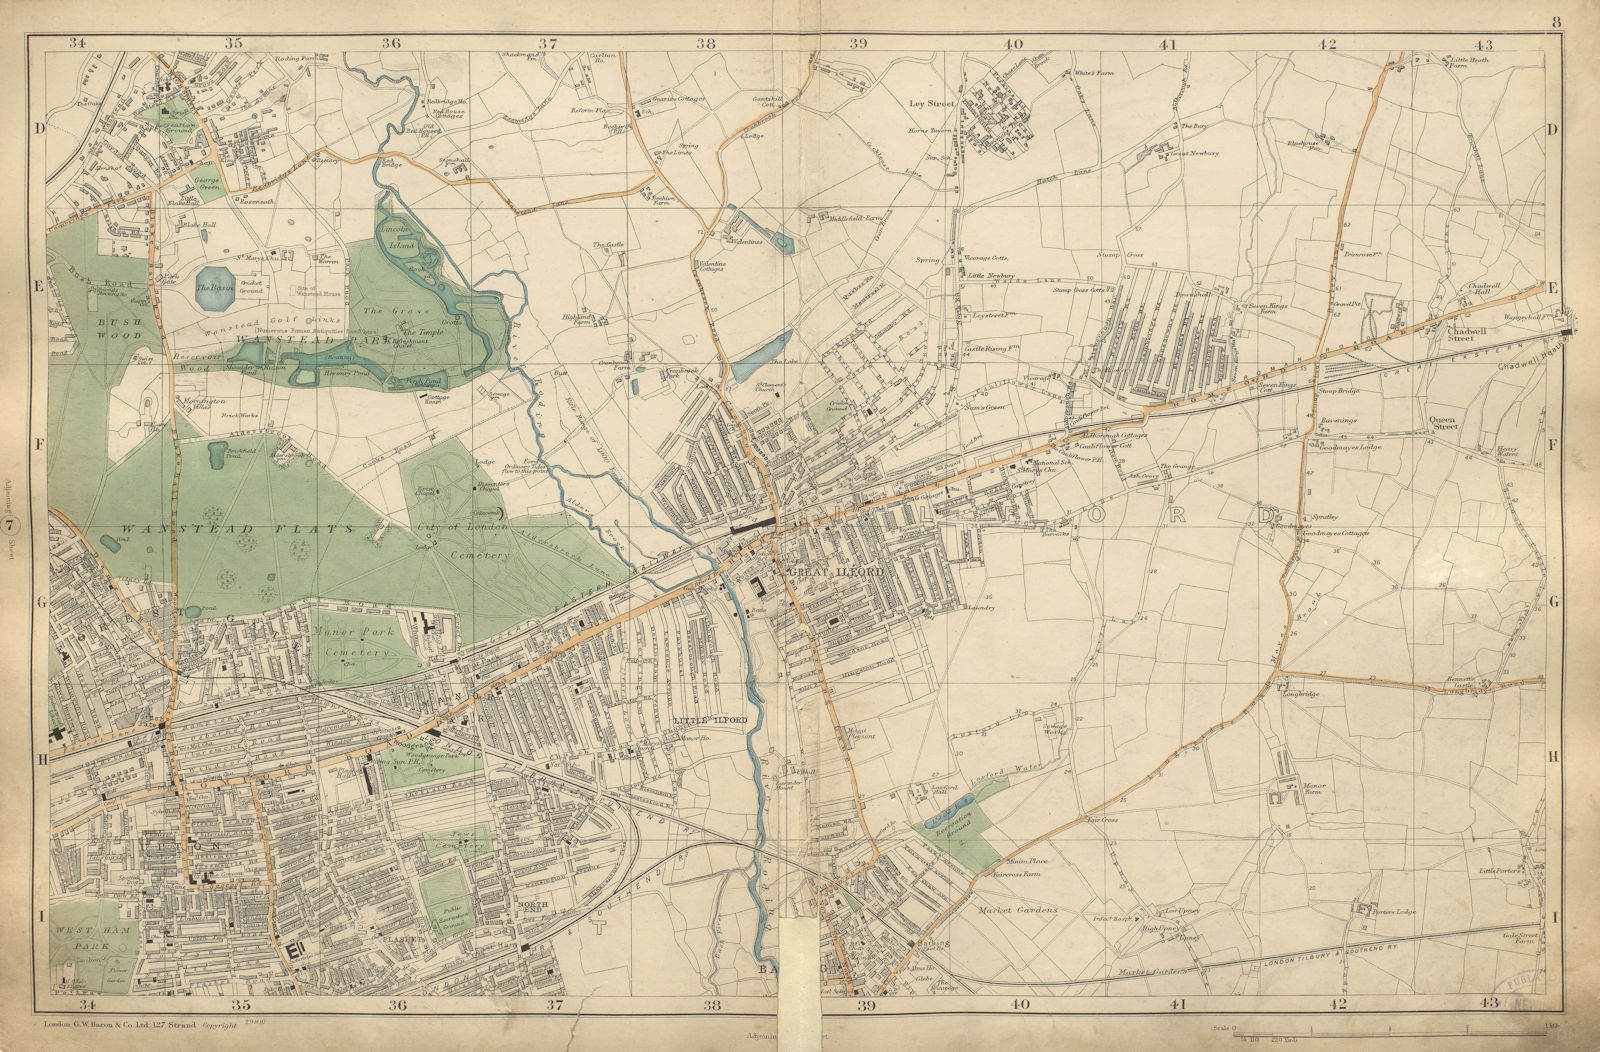 WANSTEAD ILFORD BARKING Forest Gate Chadwell Heath Seven Kings BACON 1900 map